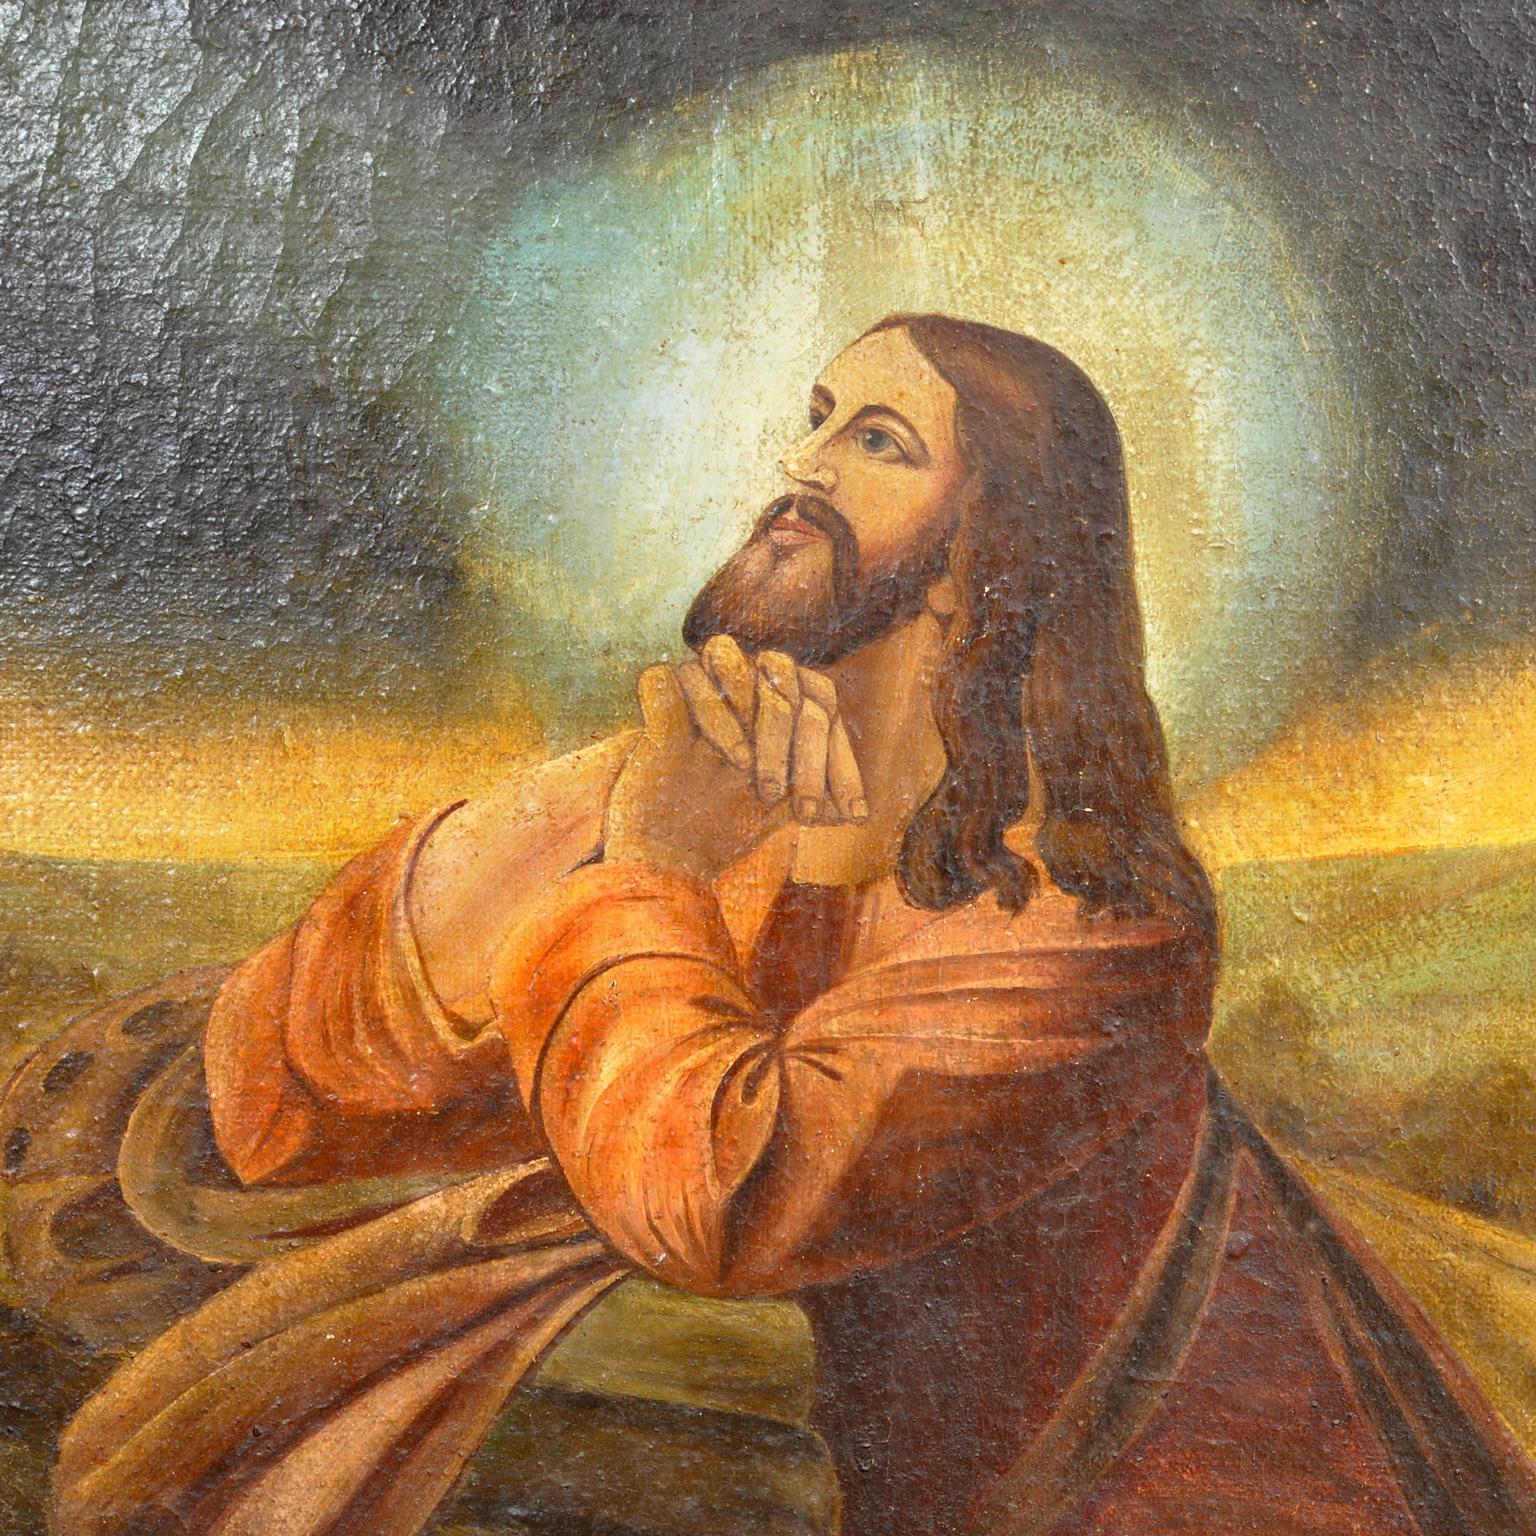 Hungarian Large Painting 0f Jesus, Original Oil On Canvas, Circa 1900 For Sale